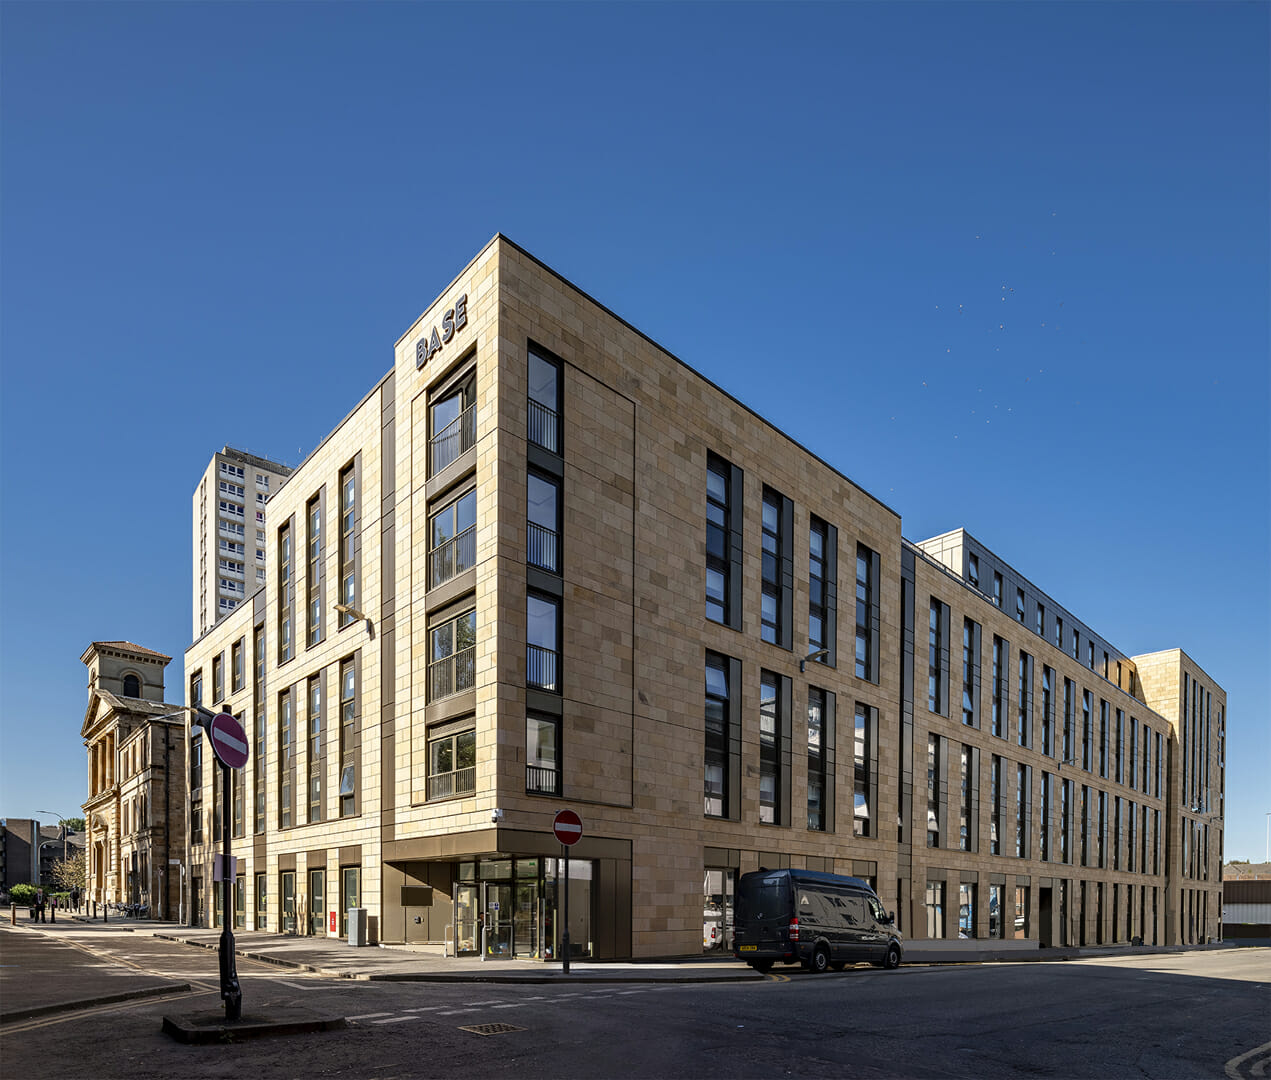 Soller Real Estate’s Base Glasgow, the student housing development designed by Mosaic Architecture + Design, has opened its doors in time for the new student term.    @RCStweets